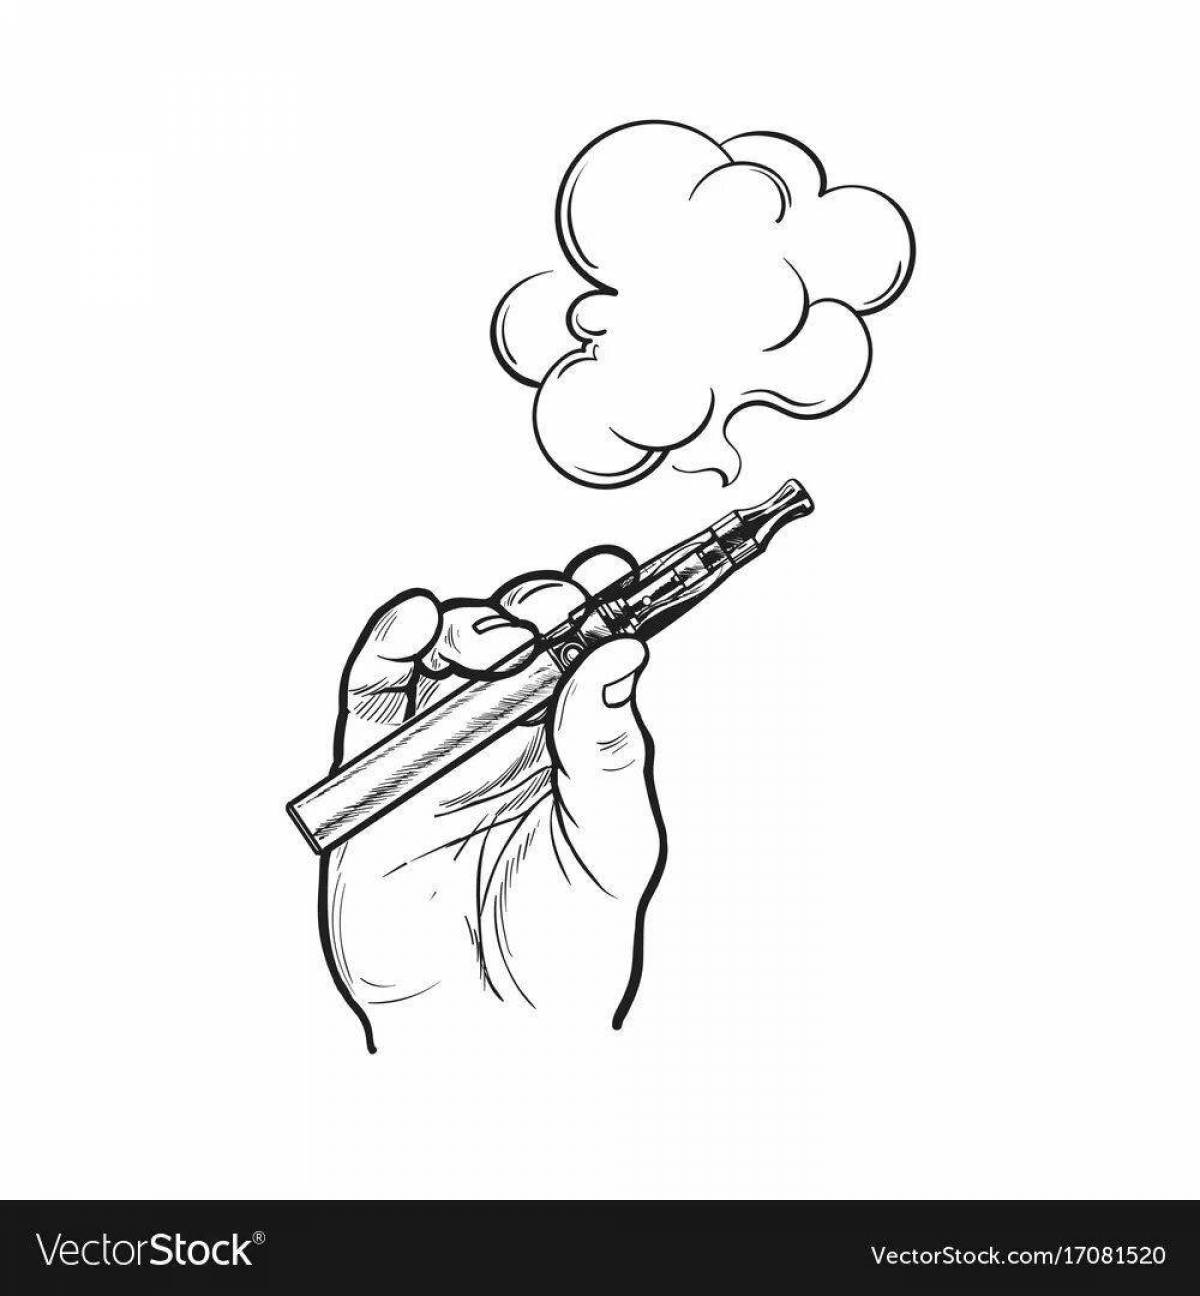 Vapes coloring page with vibrant colors